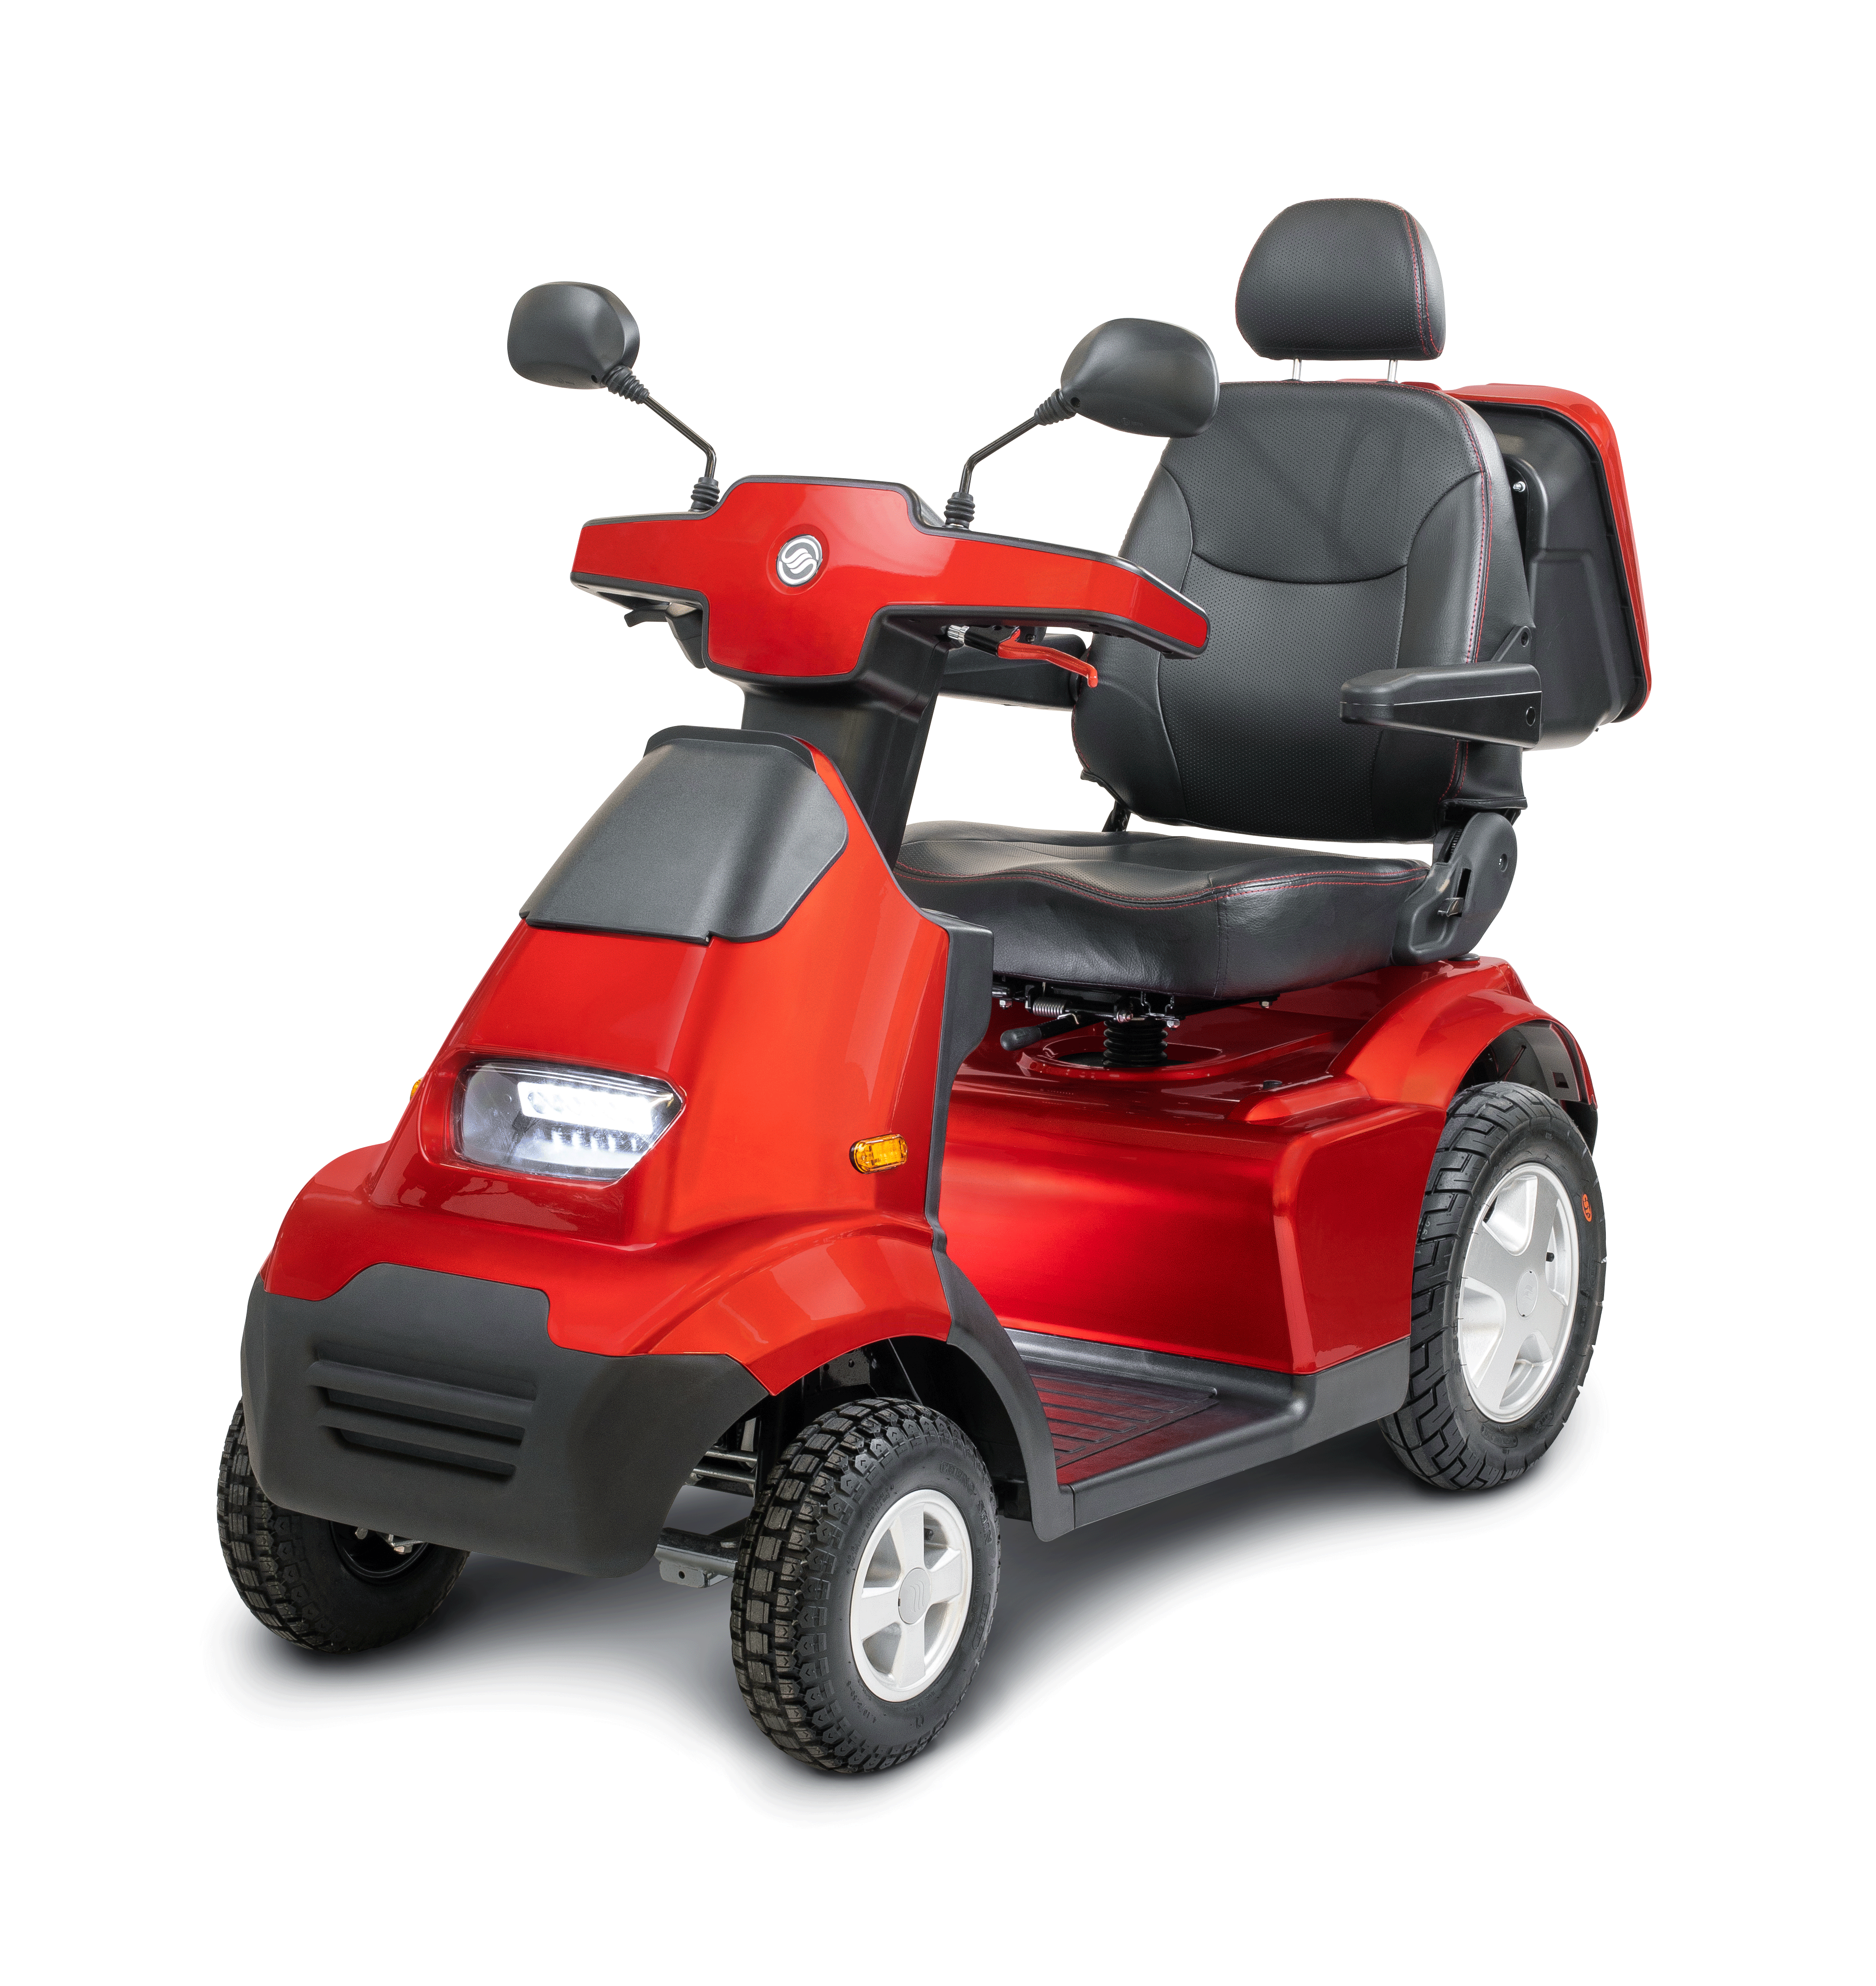 Afikim Afiscooter S4 Heavy-Duty Mobility Scooter